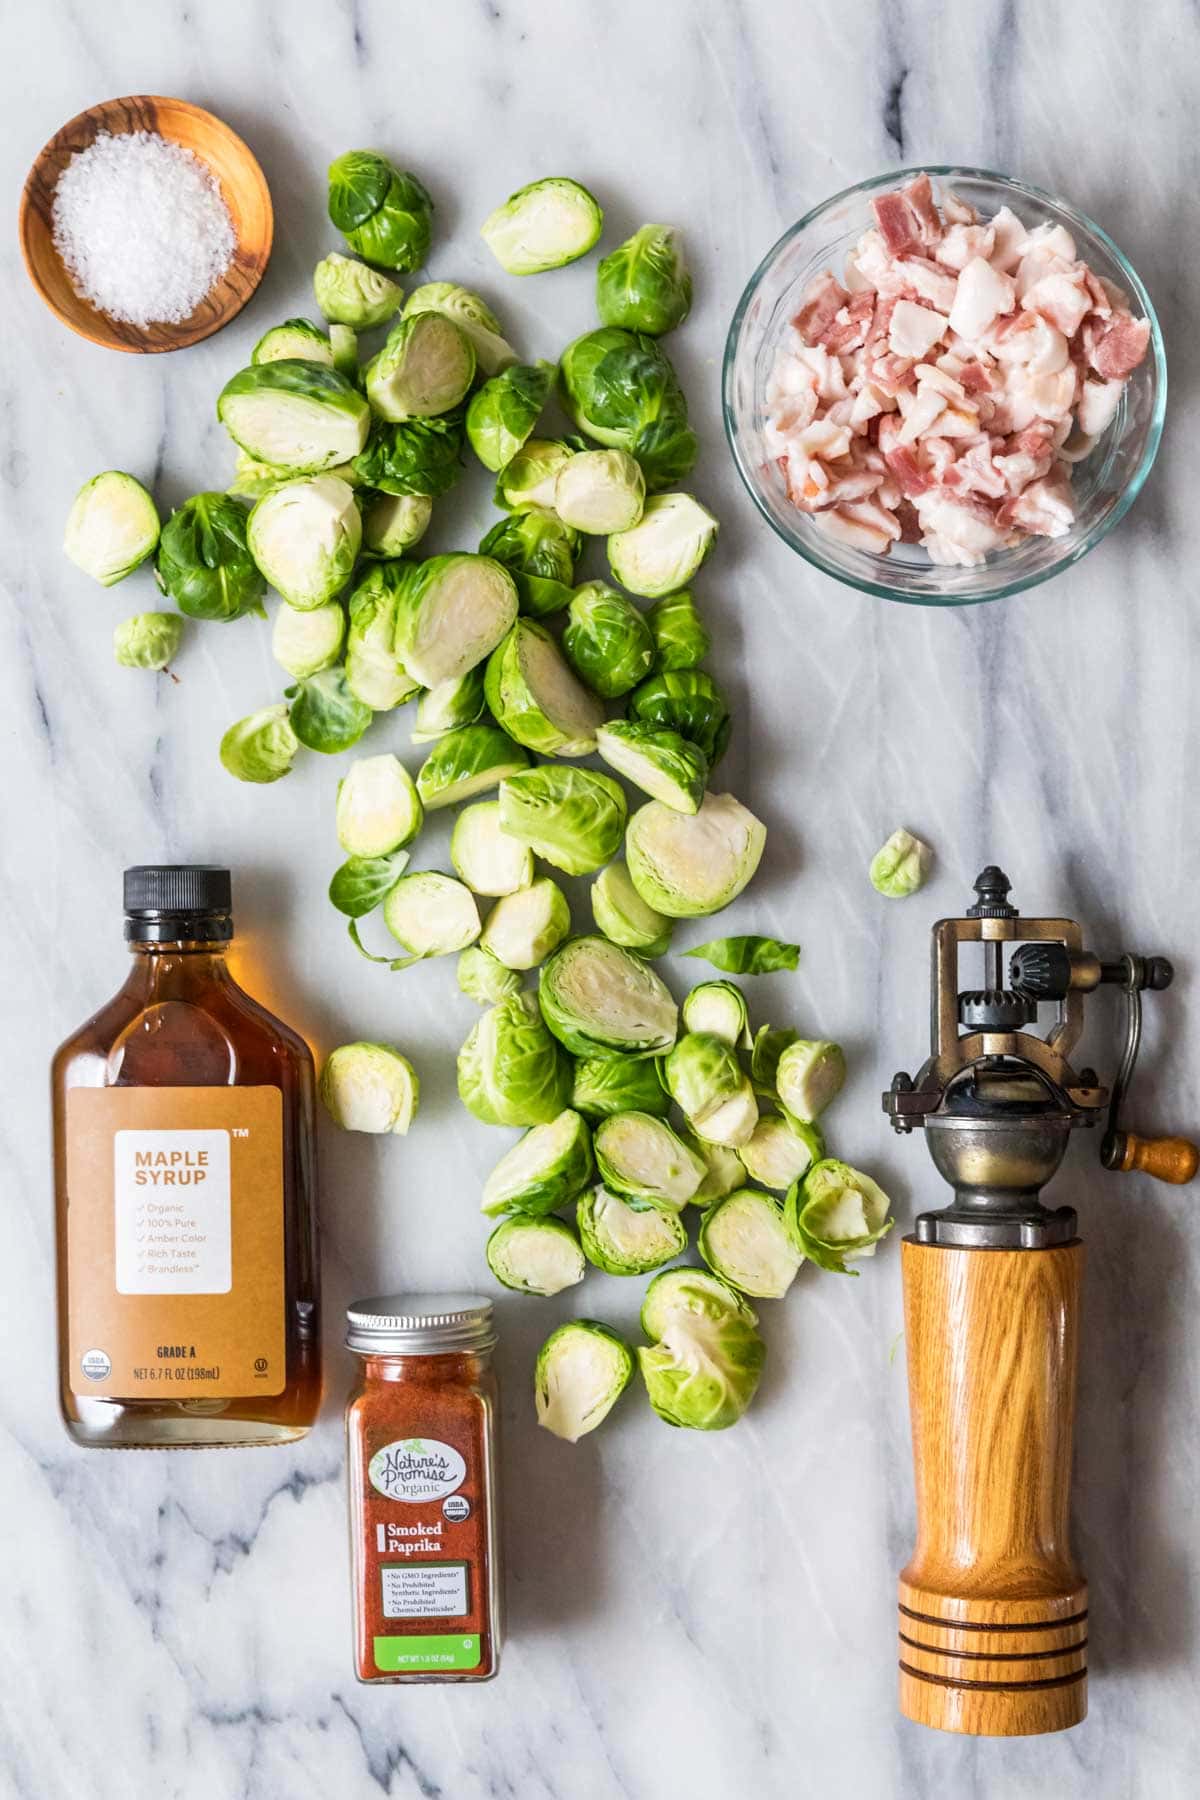 Overhead view of ingredients including brussels sprouts, bacon, maple syrup, and spices.